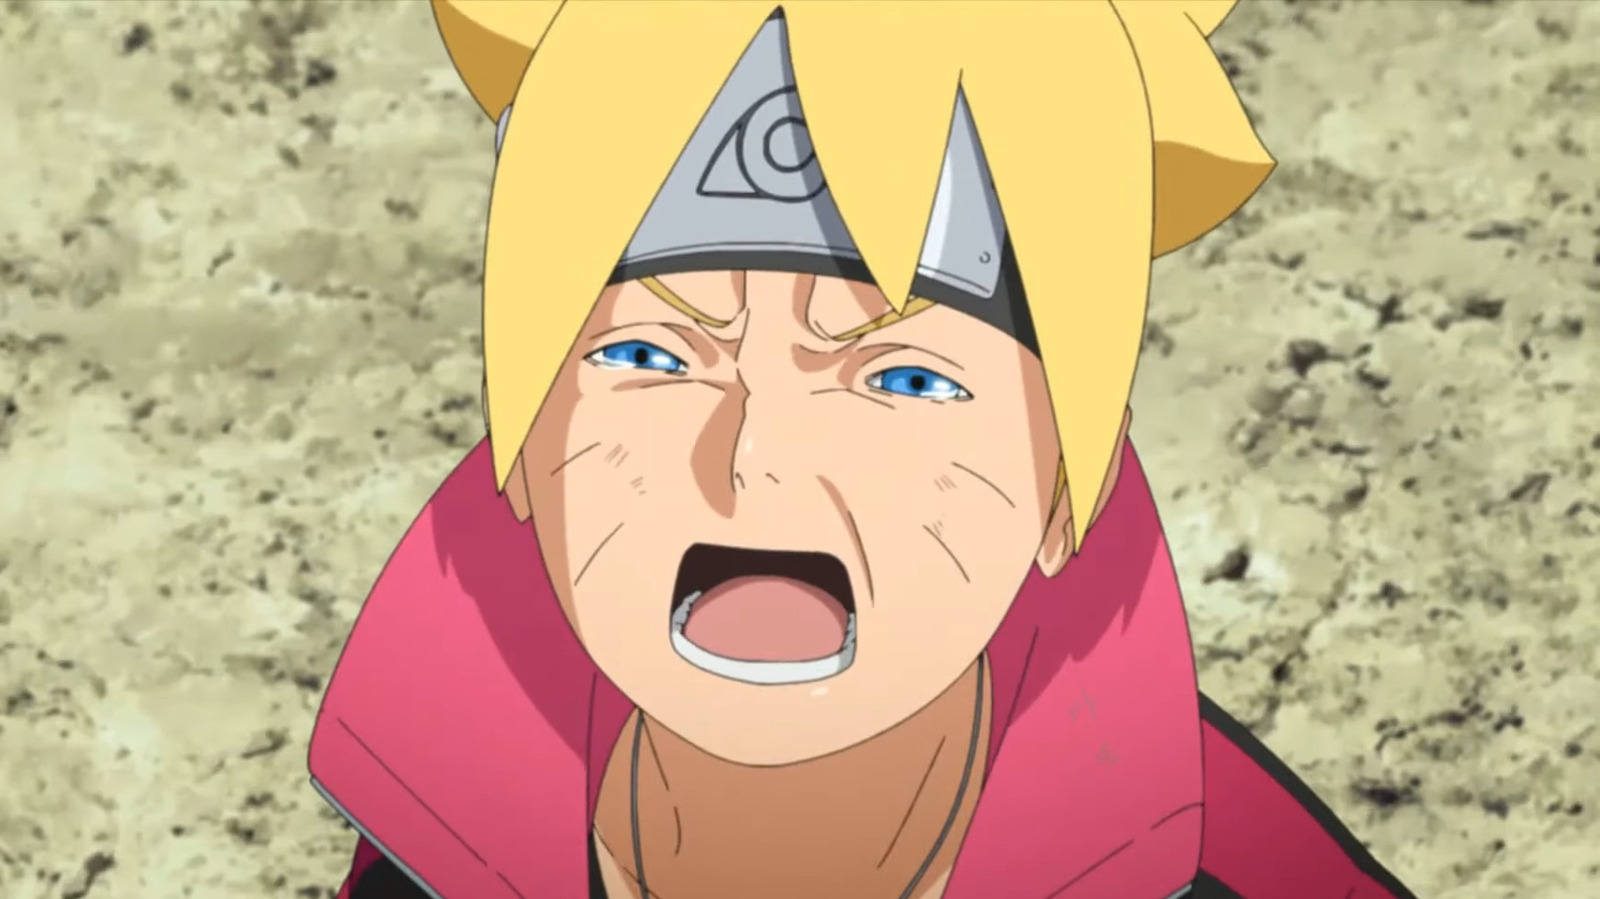 The Boruto_anime ts better tha the manga because st fleshes out character  The manga's pacing is